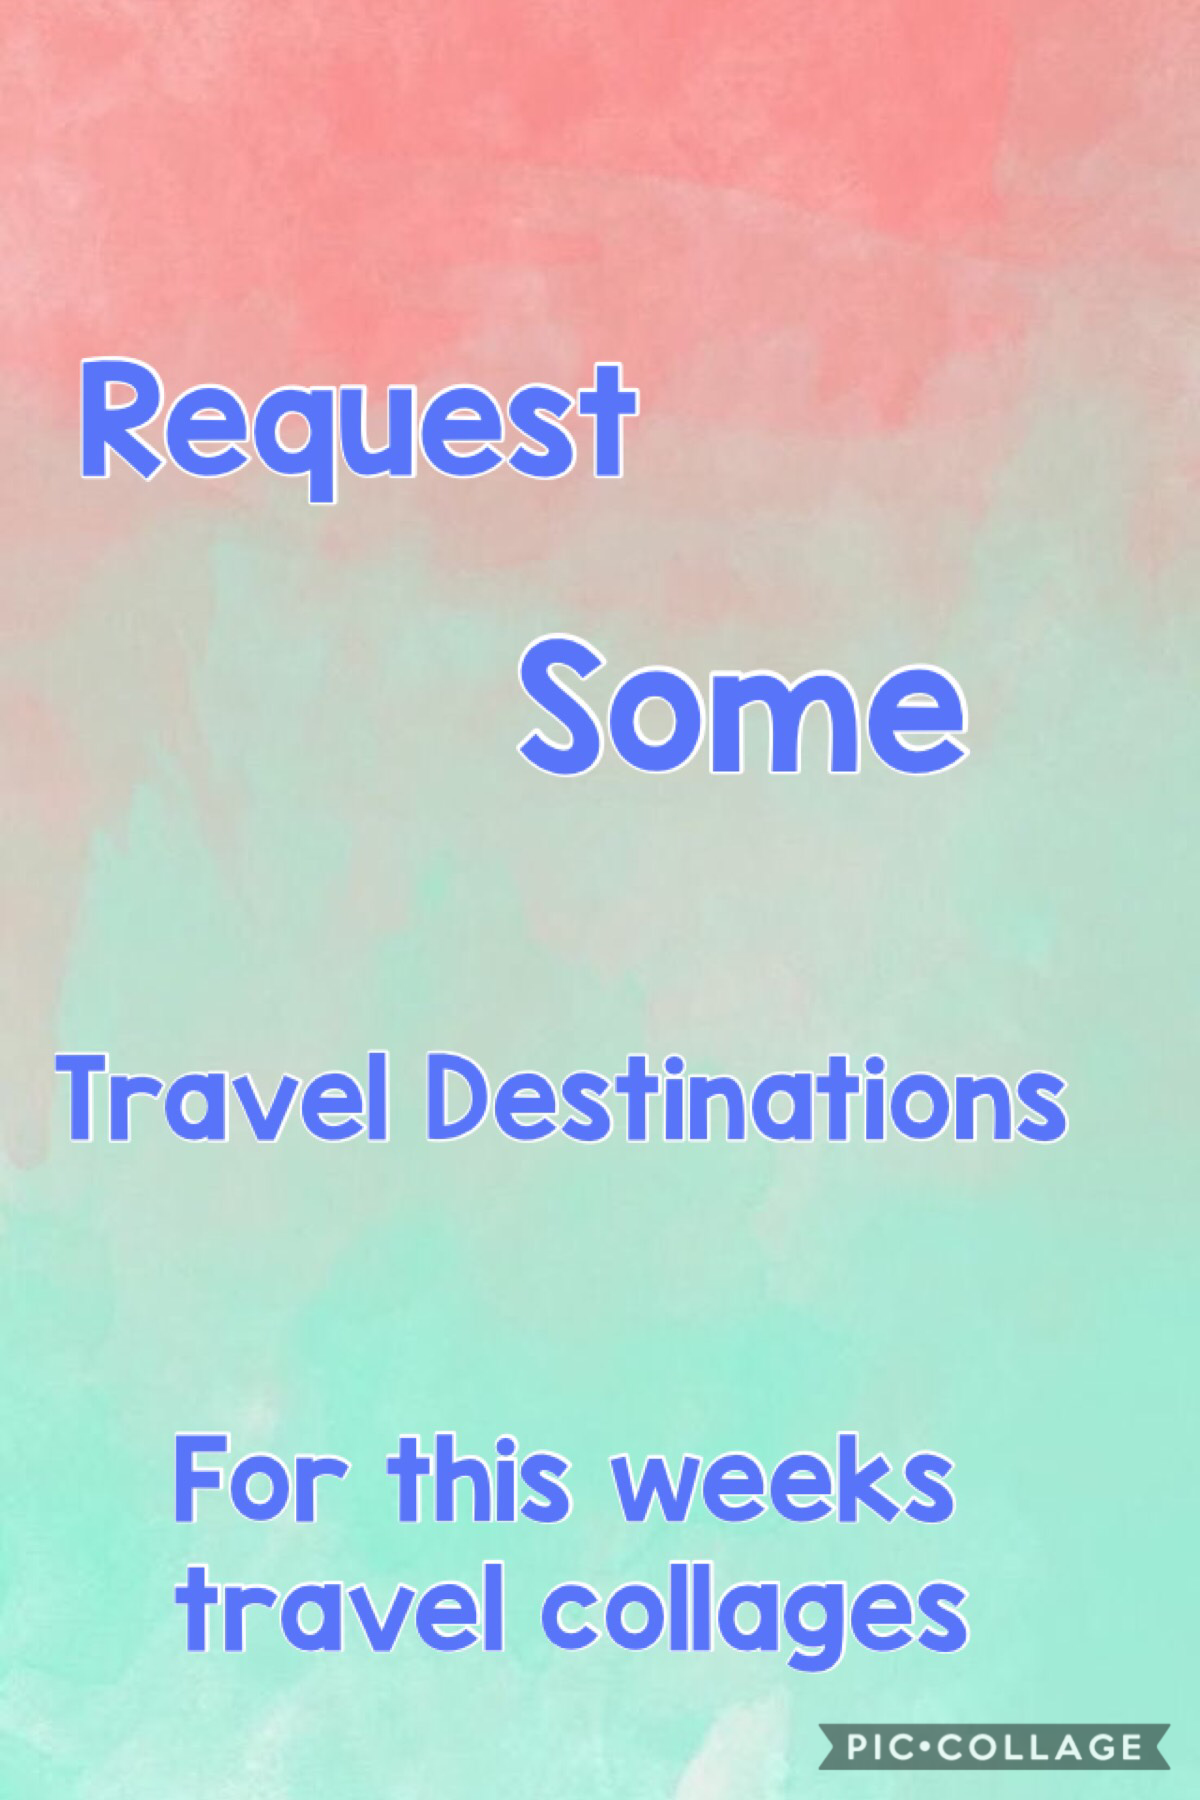 Request some travel destinations for this weeks collages